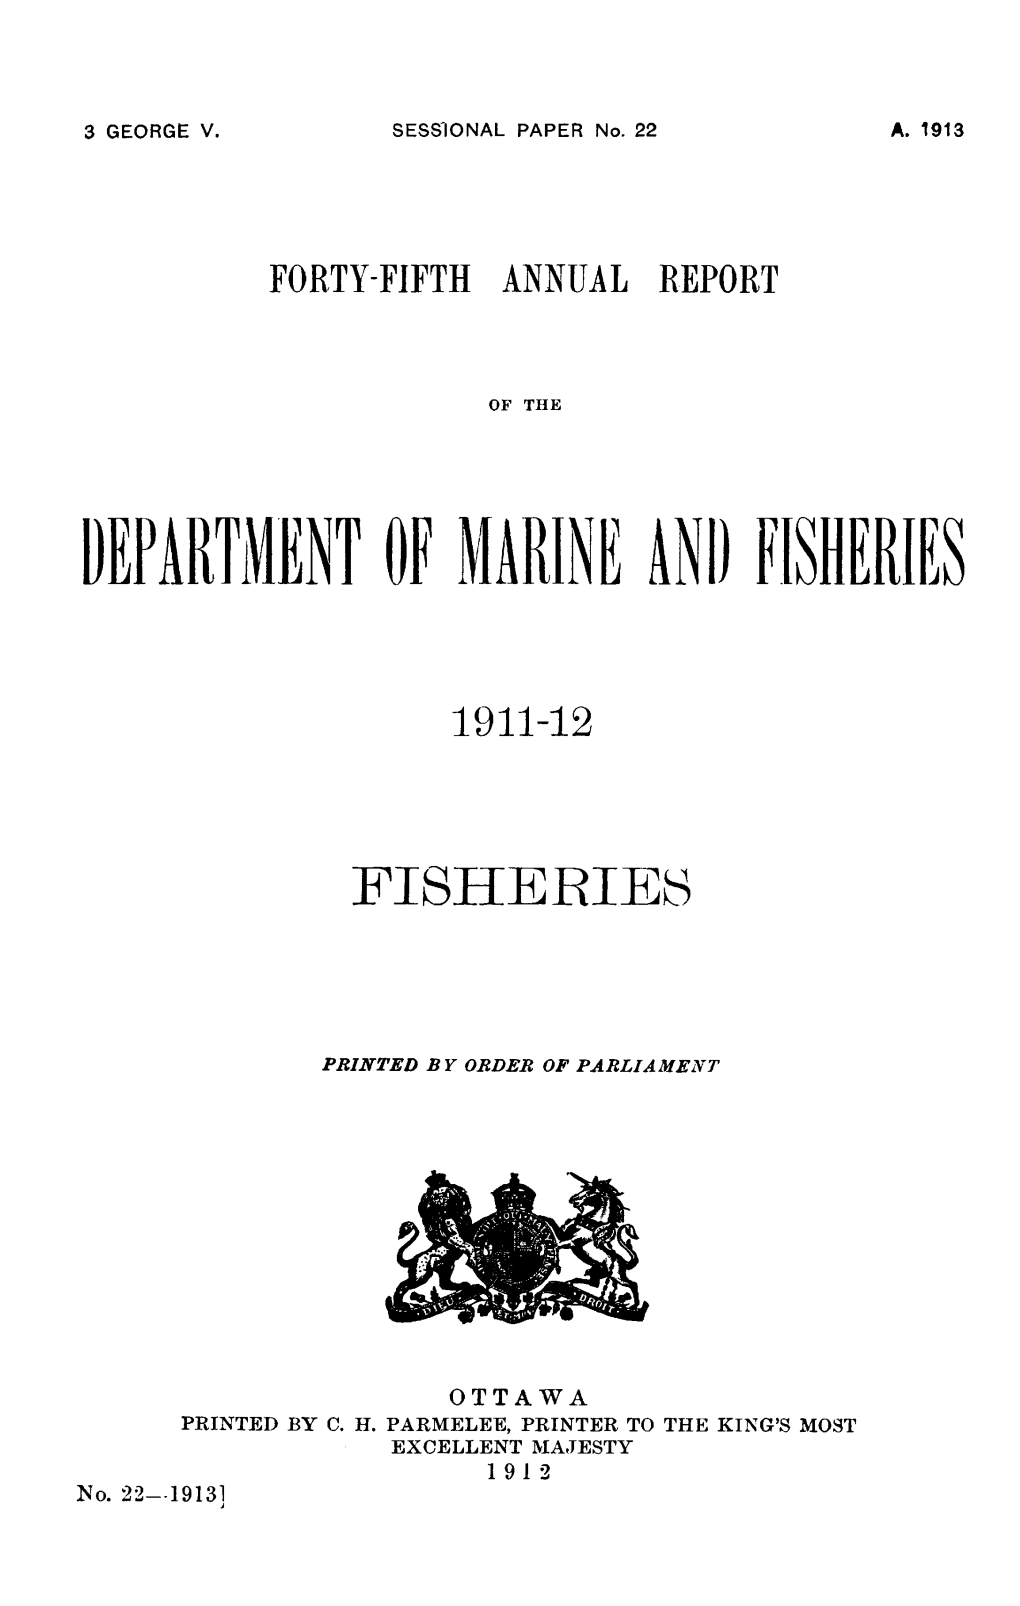 45Th Annual Report, Department of Marine and Fisheries (1911-12)